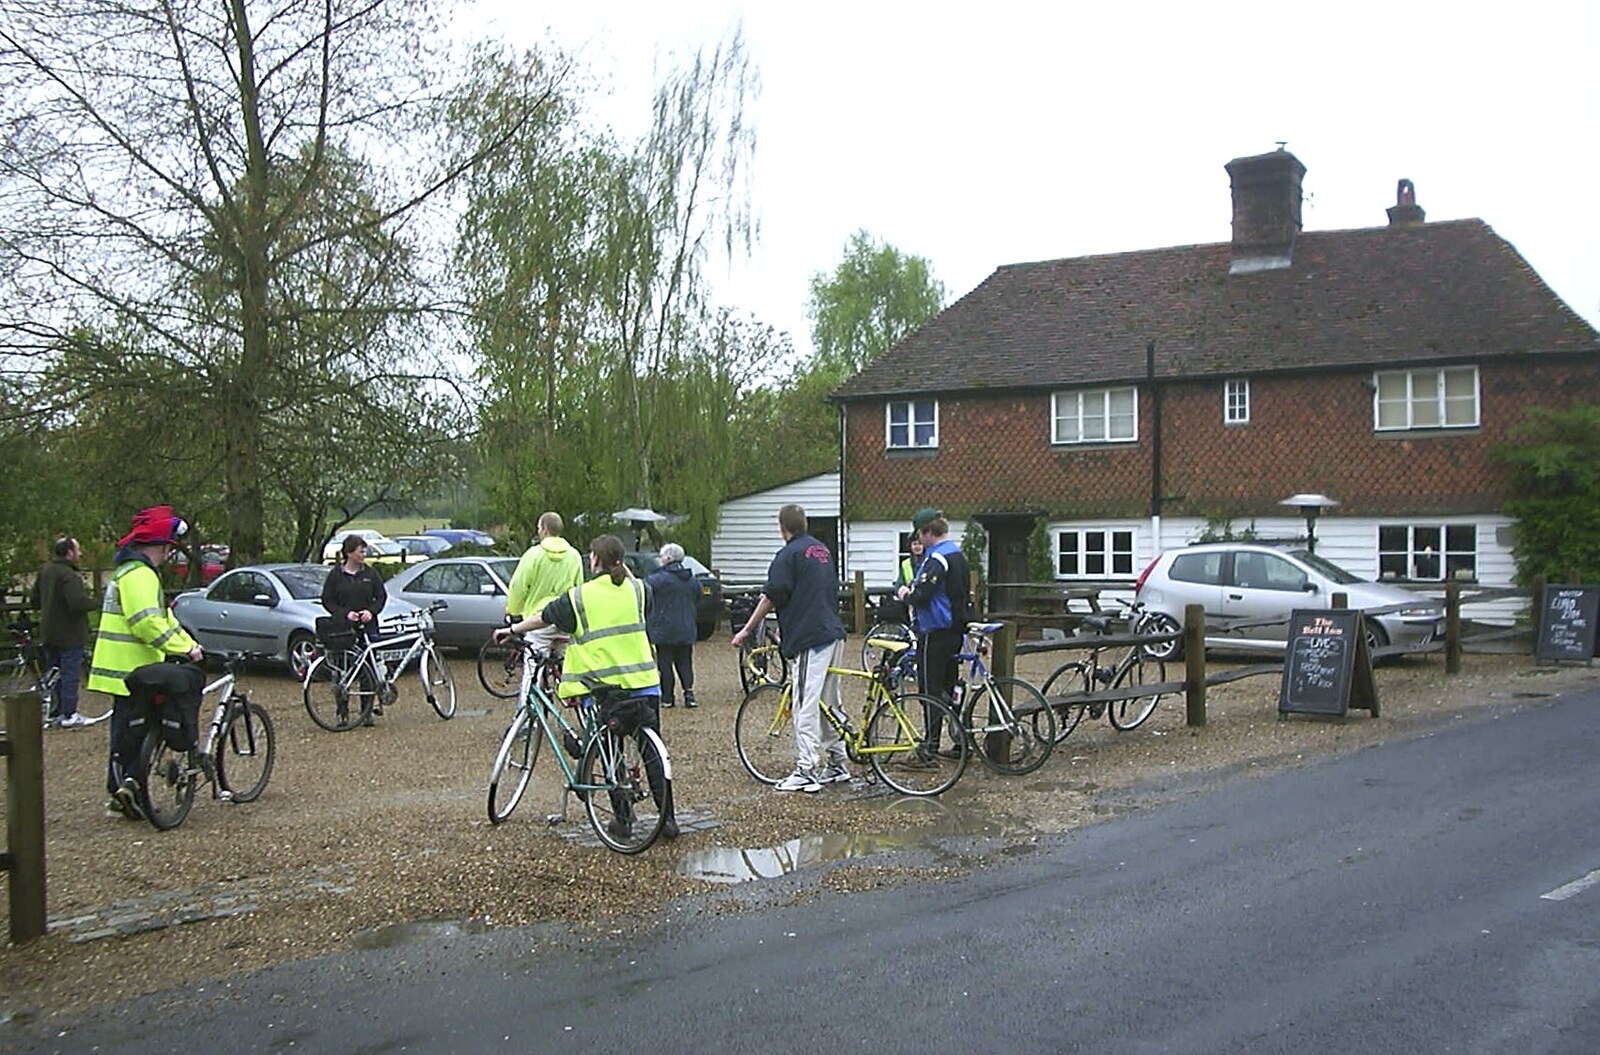 Bikes in the car park of the Bell, Smarden from The BSCC Annual Bike Ride, Lenham, Kent - 8th May 2004